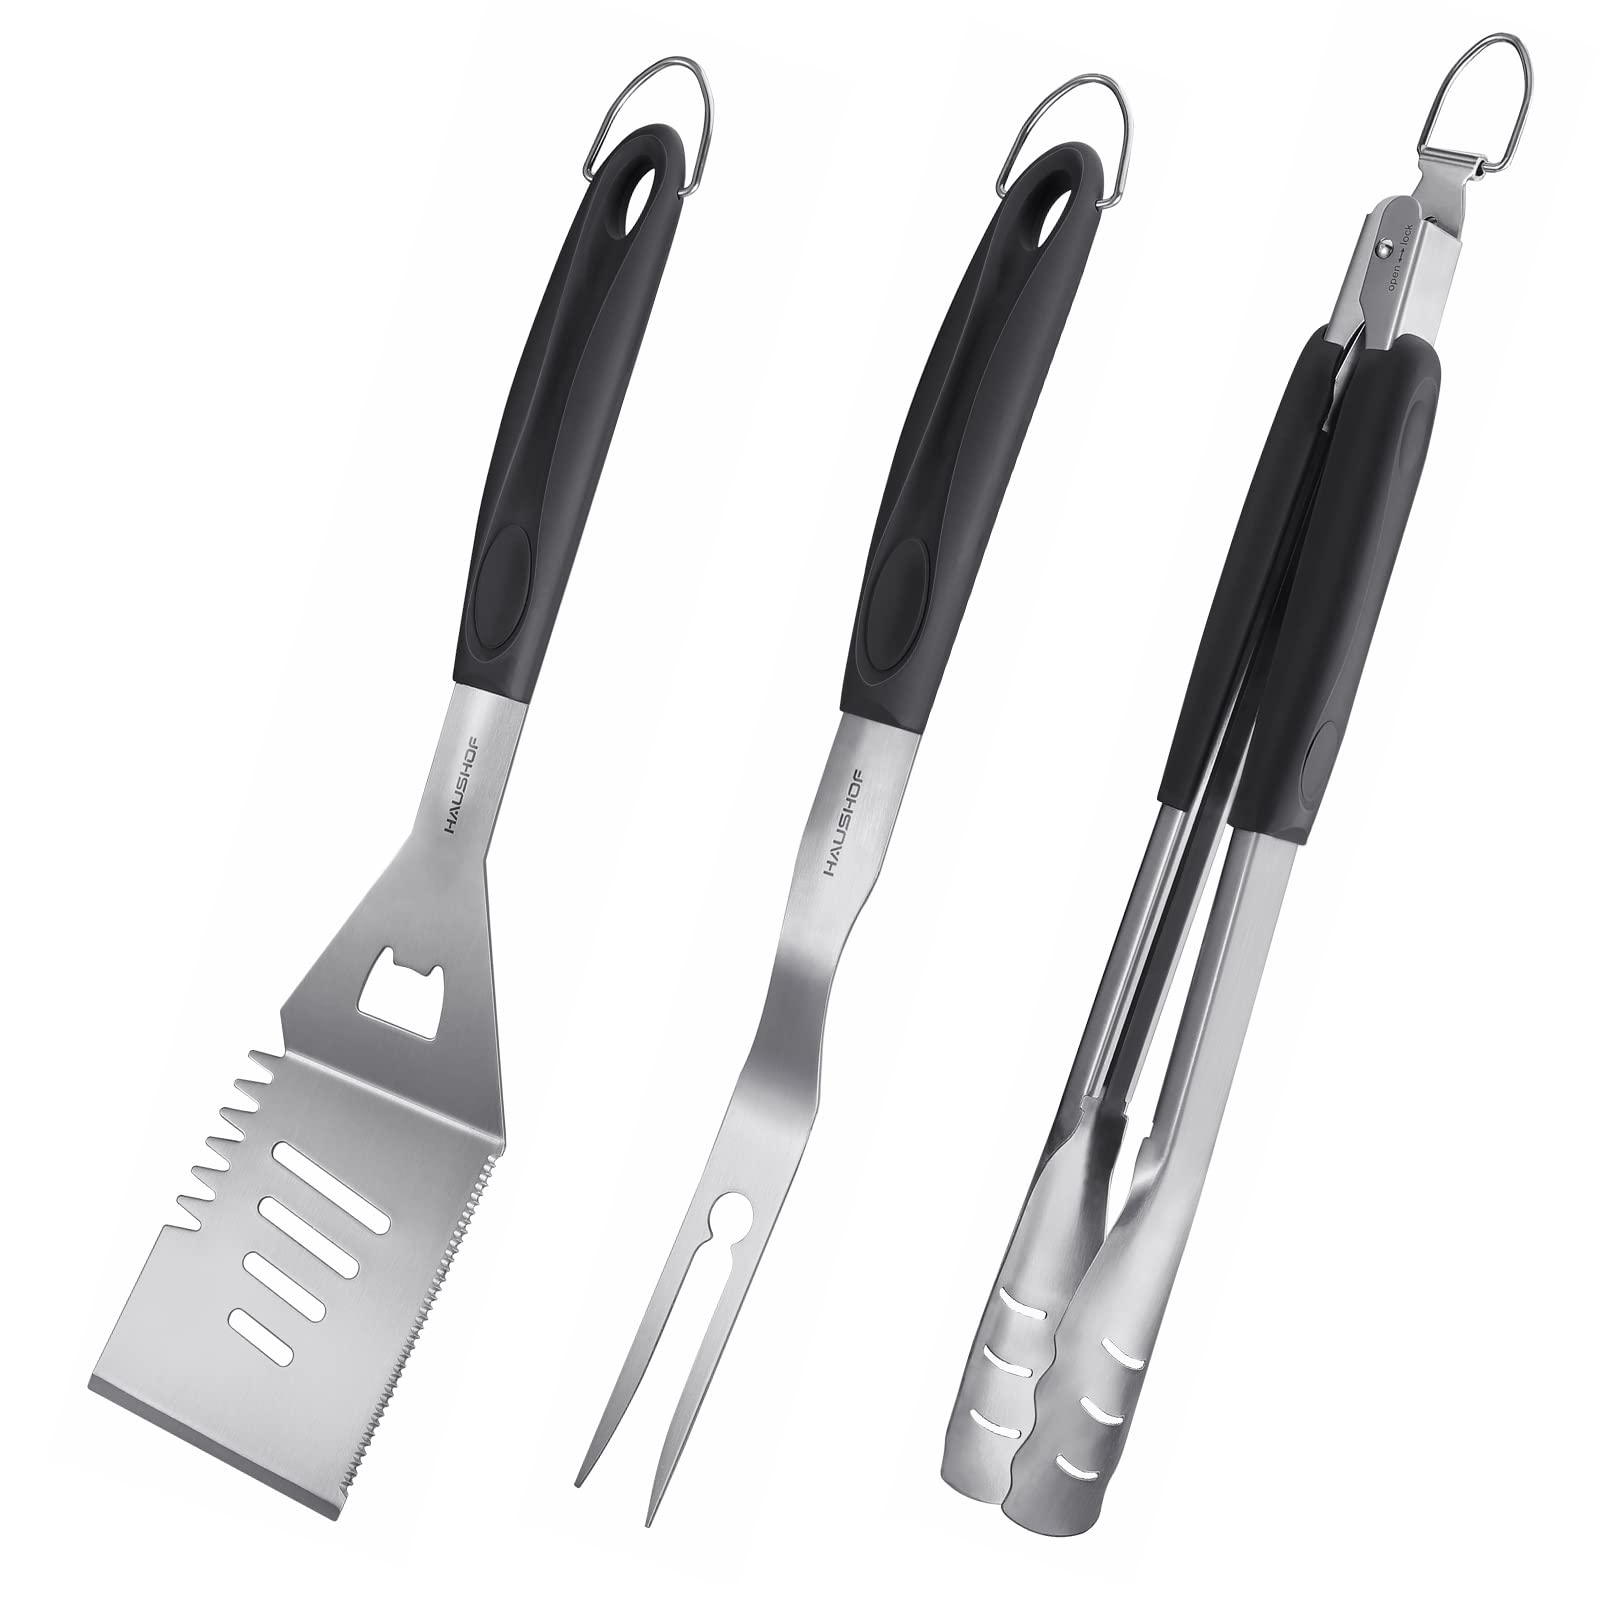 HAUSHOF Large Grill Accessories Heavy Duty BBQ Set Gifts for Men/Women - Premium Stainless Steel Spatula, Fork & Tongs (16.5/16/16.5 in.), Barbecue Utensils Tool Kit Gift for Grilling Lover Outdoor